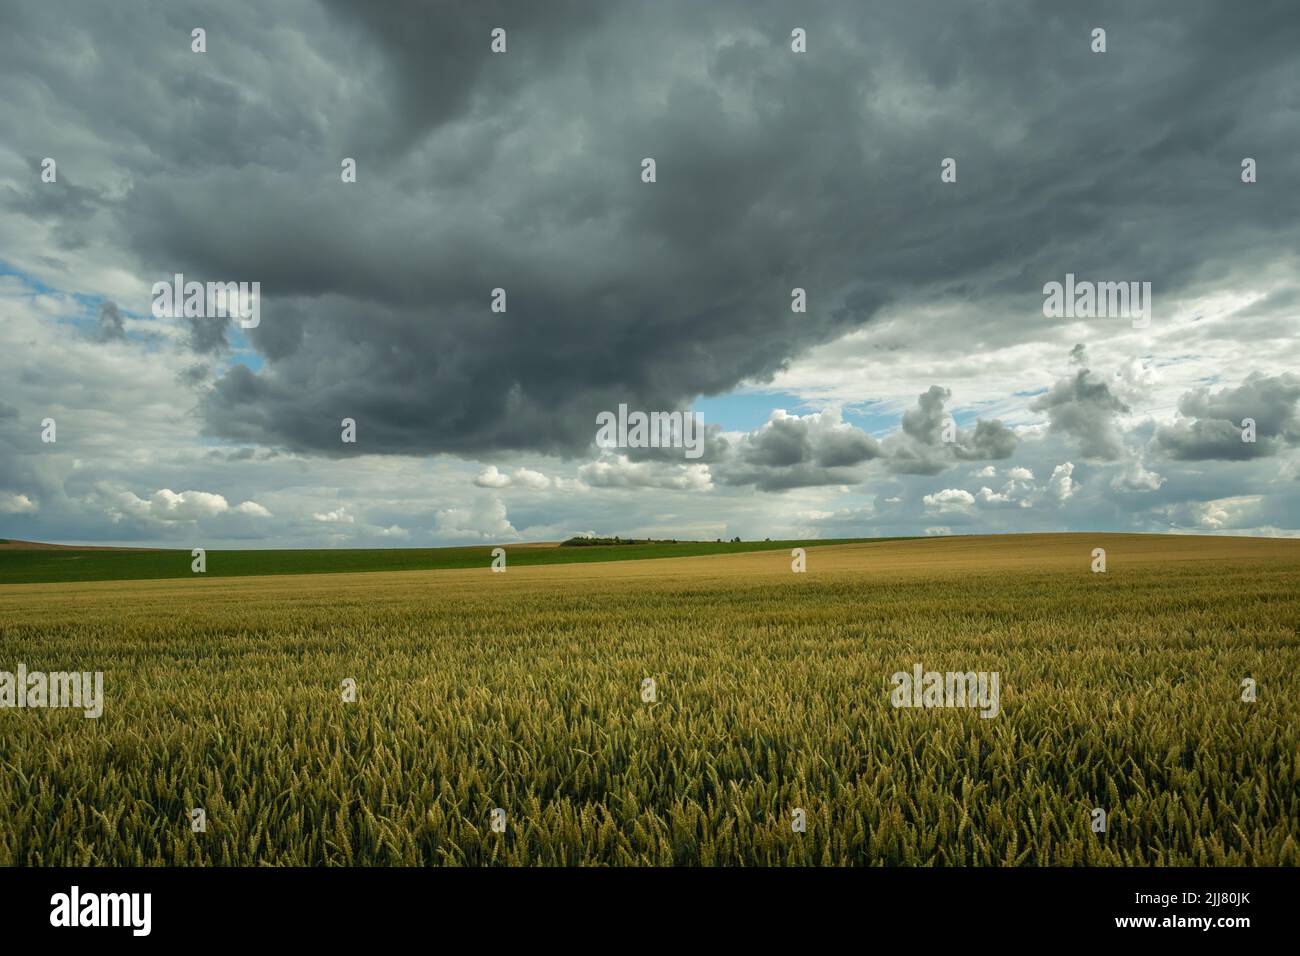 Huge wheat field and storm clouds in the sky, summer rural view Stock Photo